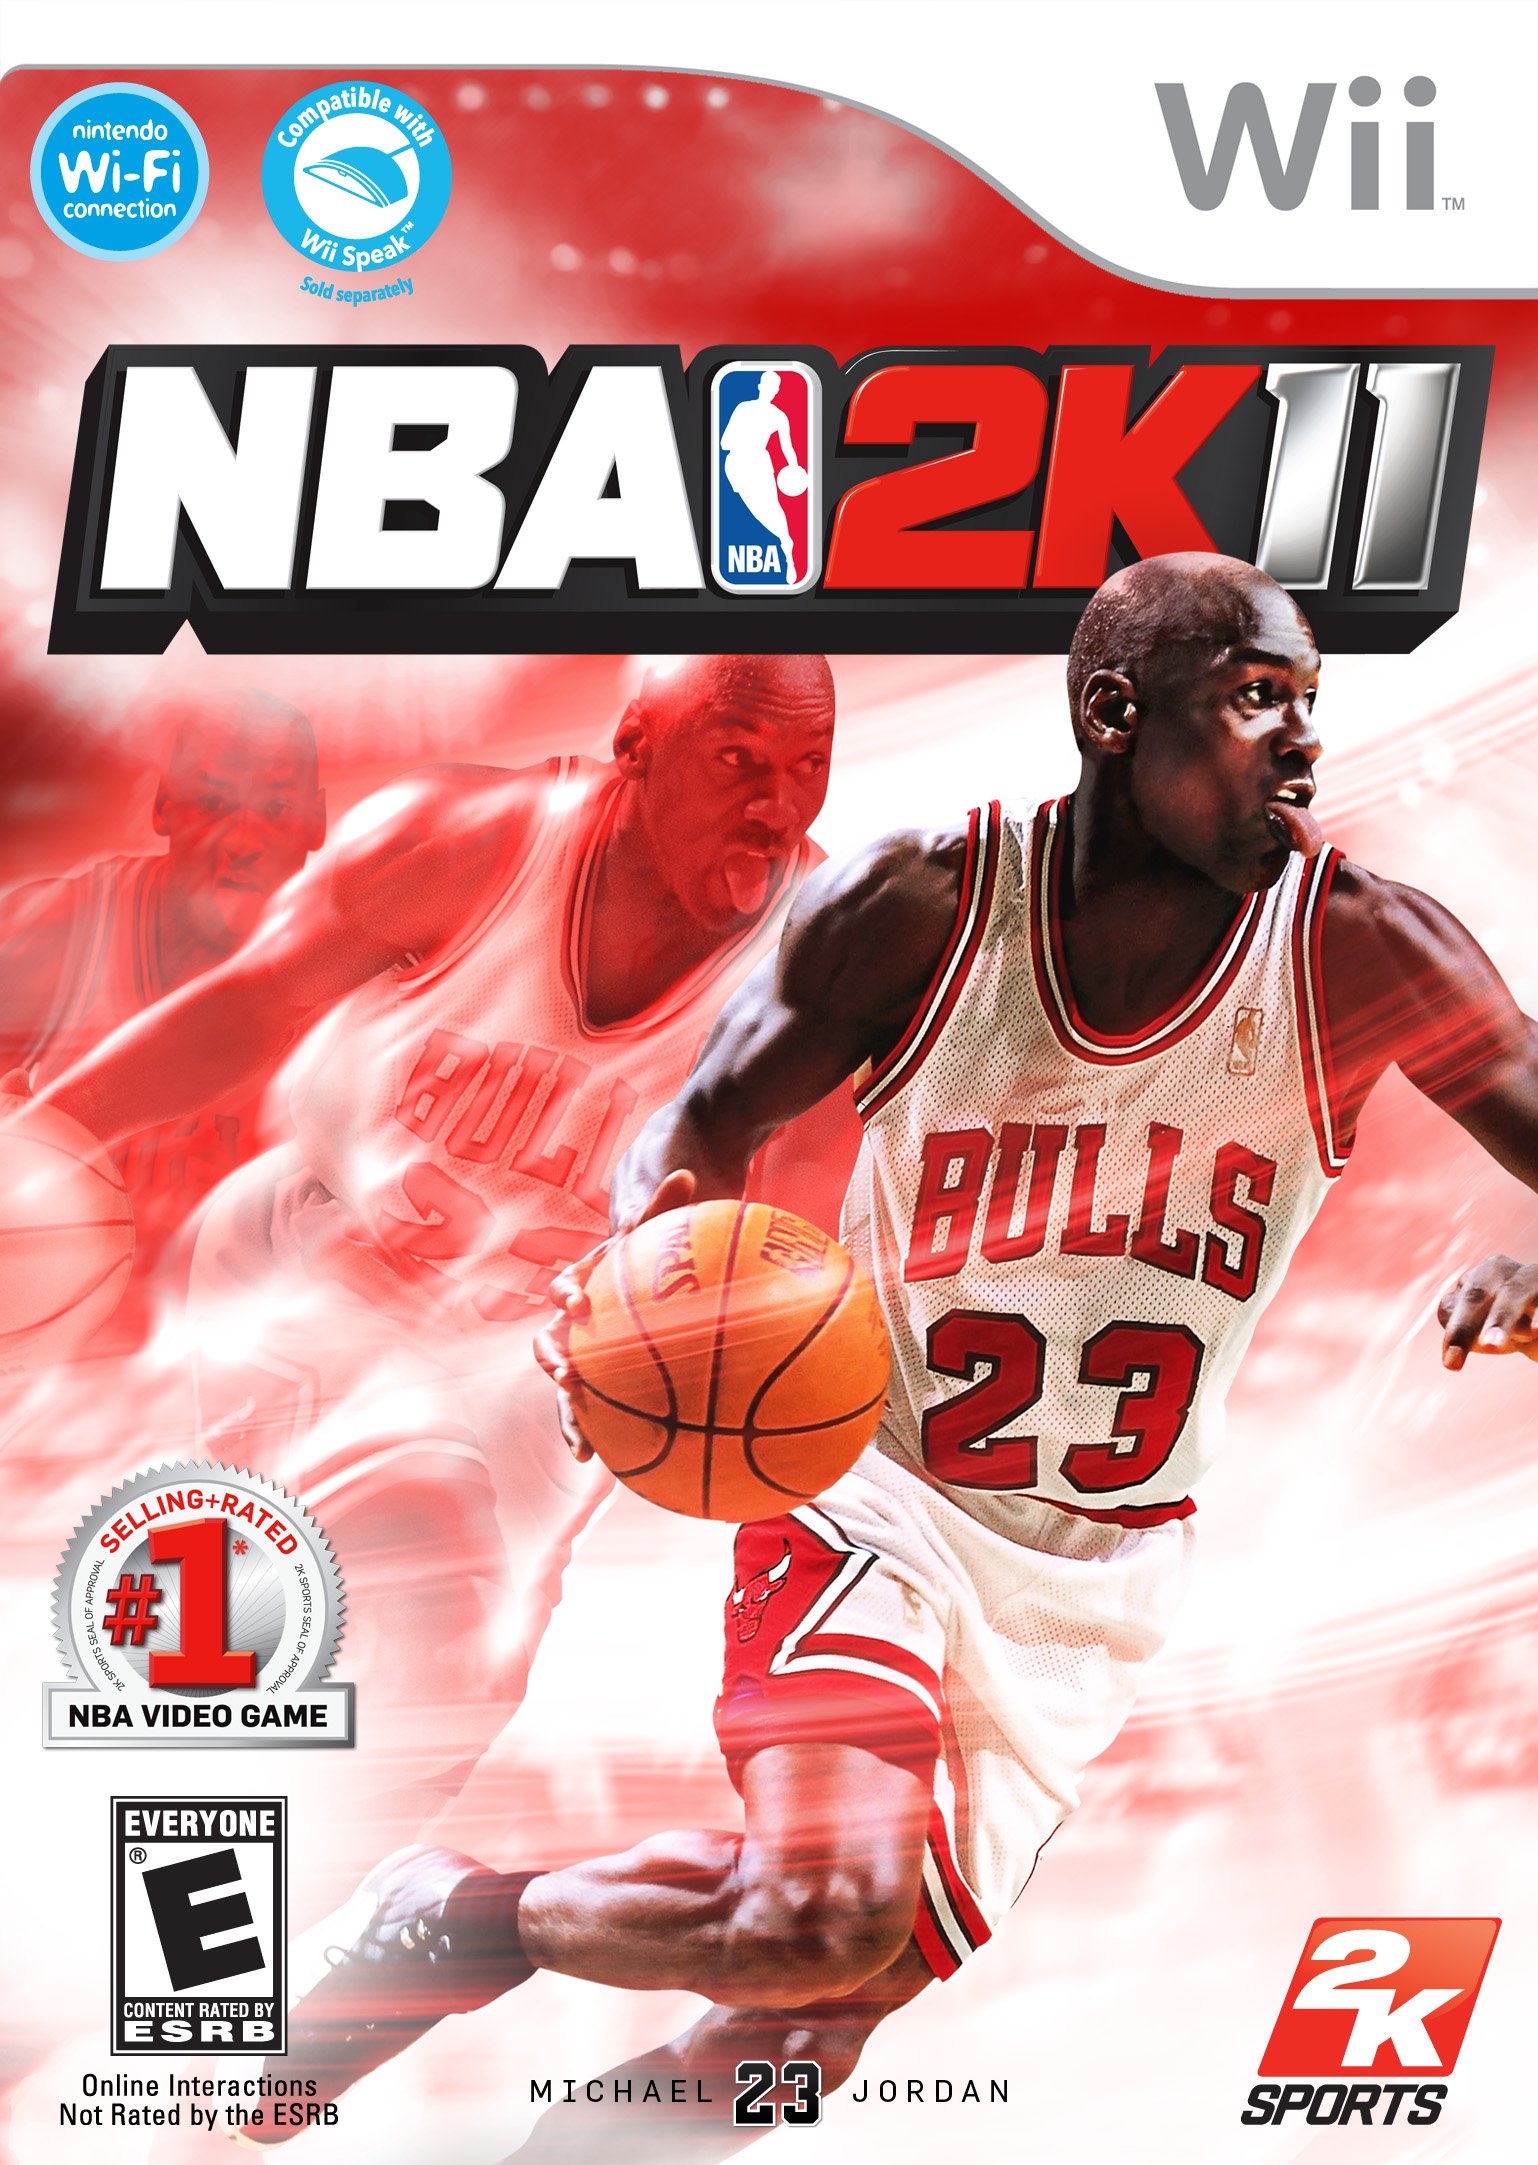 NBA 2K11 Release Date (Wii, Xbox 360, PS3, PC, PSP)